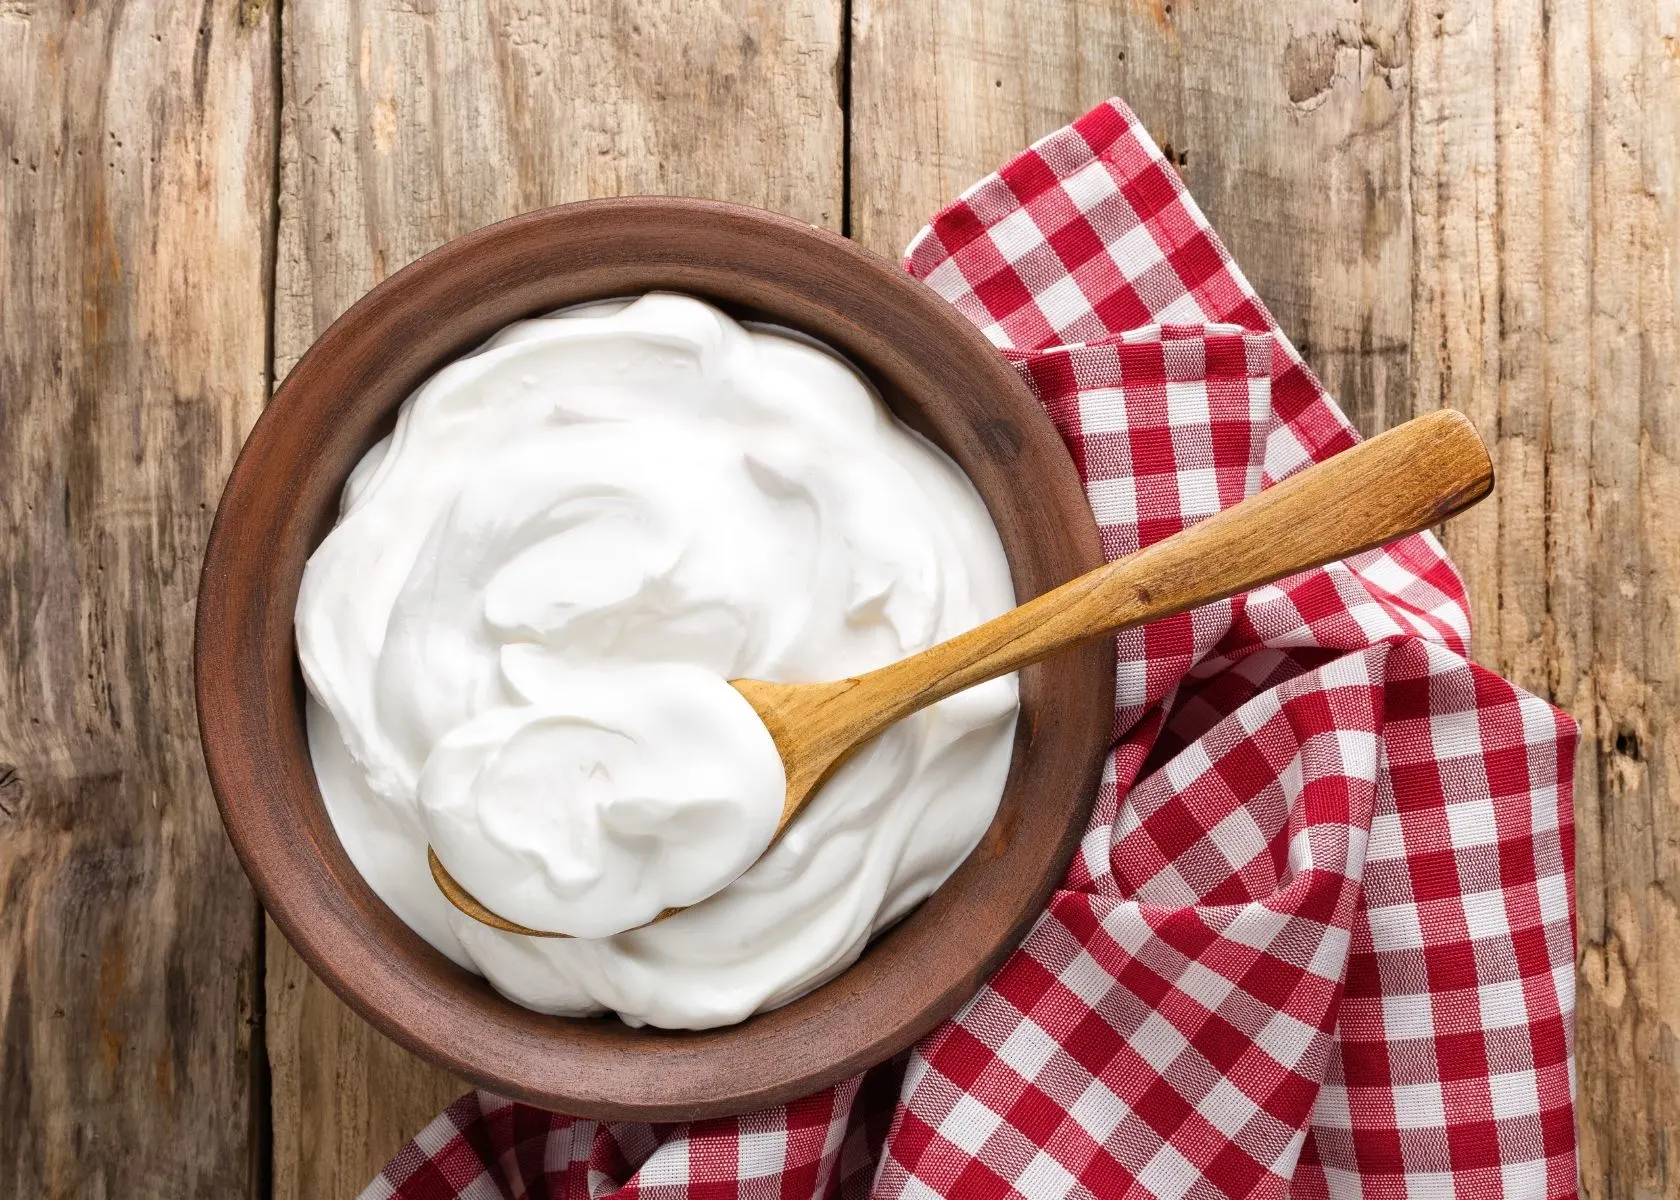 Sour cream in wooden bowl with red plaid kitchen towel and large wooden spoon.